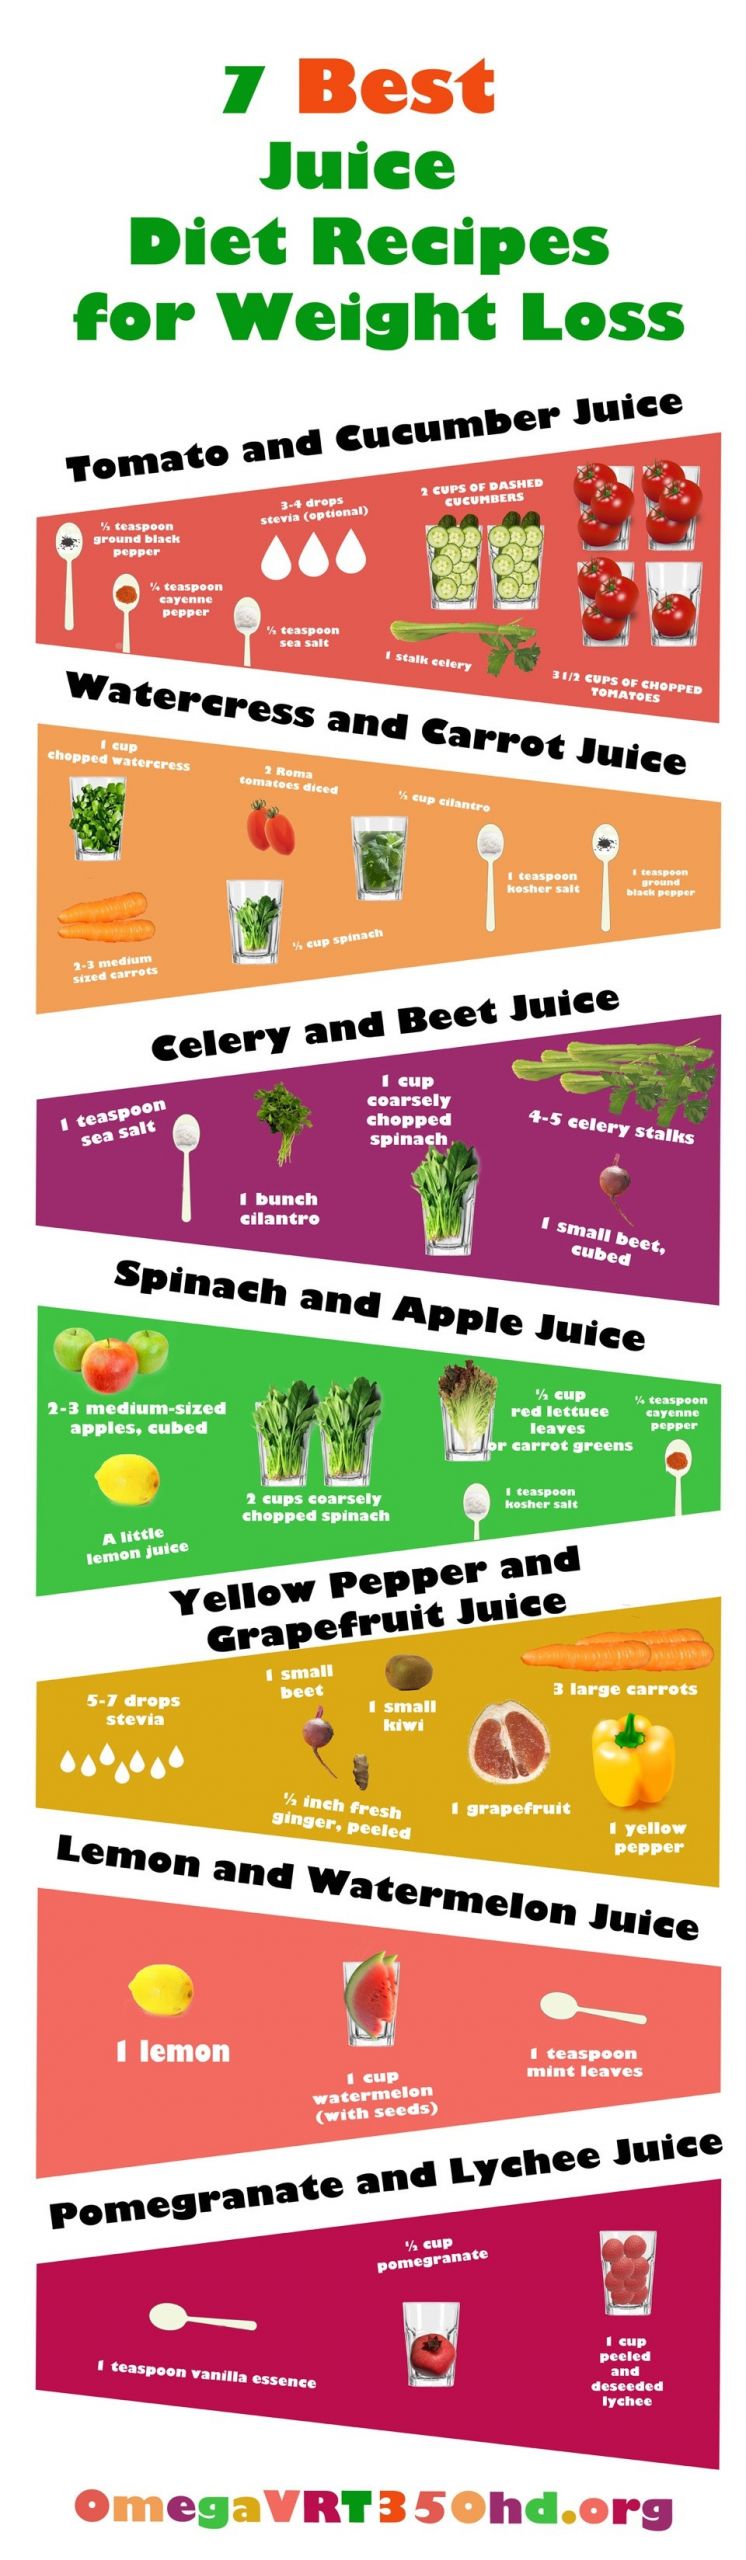 Juicer Recipes Weight Loss
 7 Simple Juicing Recipes for Weight Loss Infographic